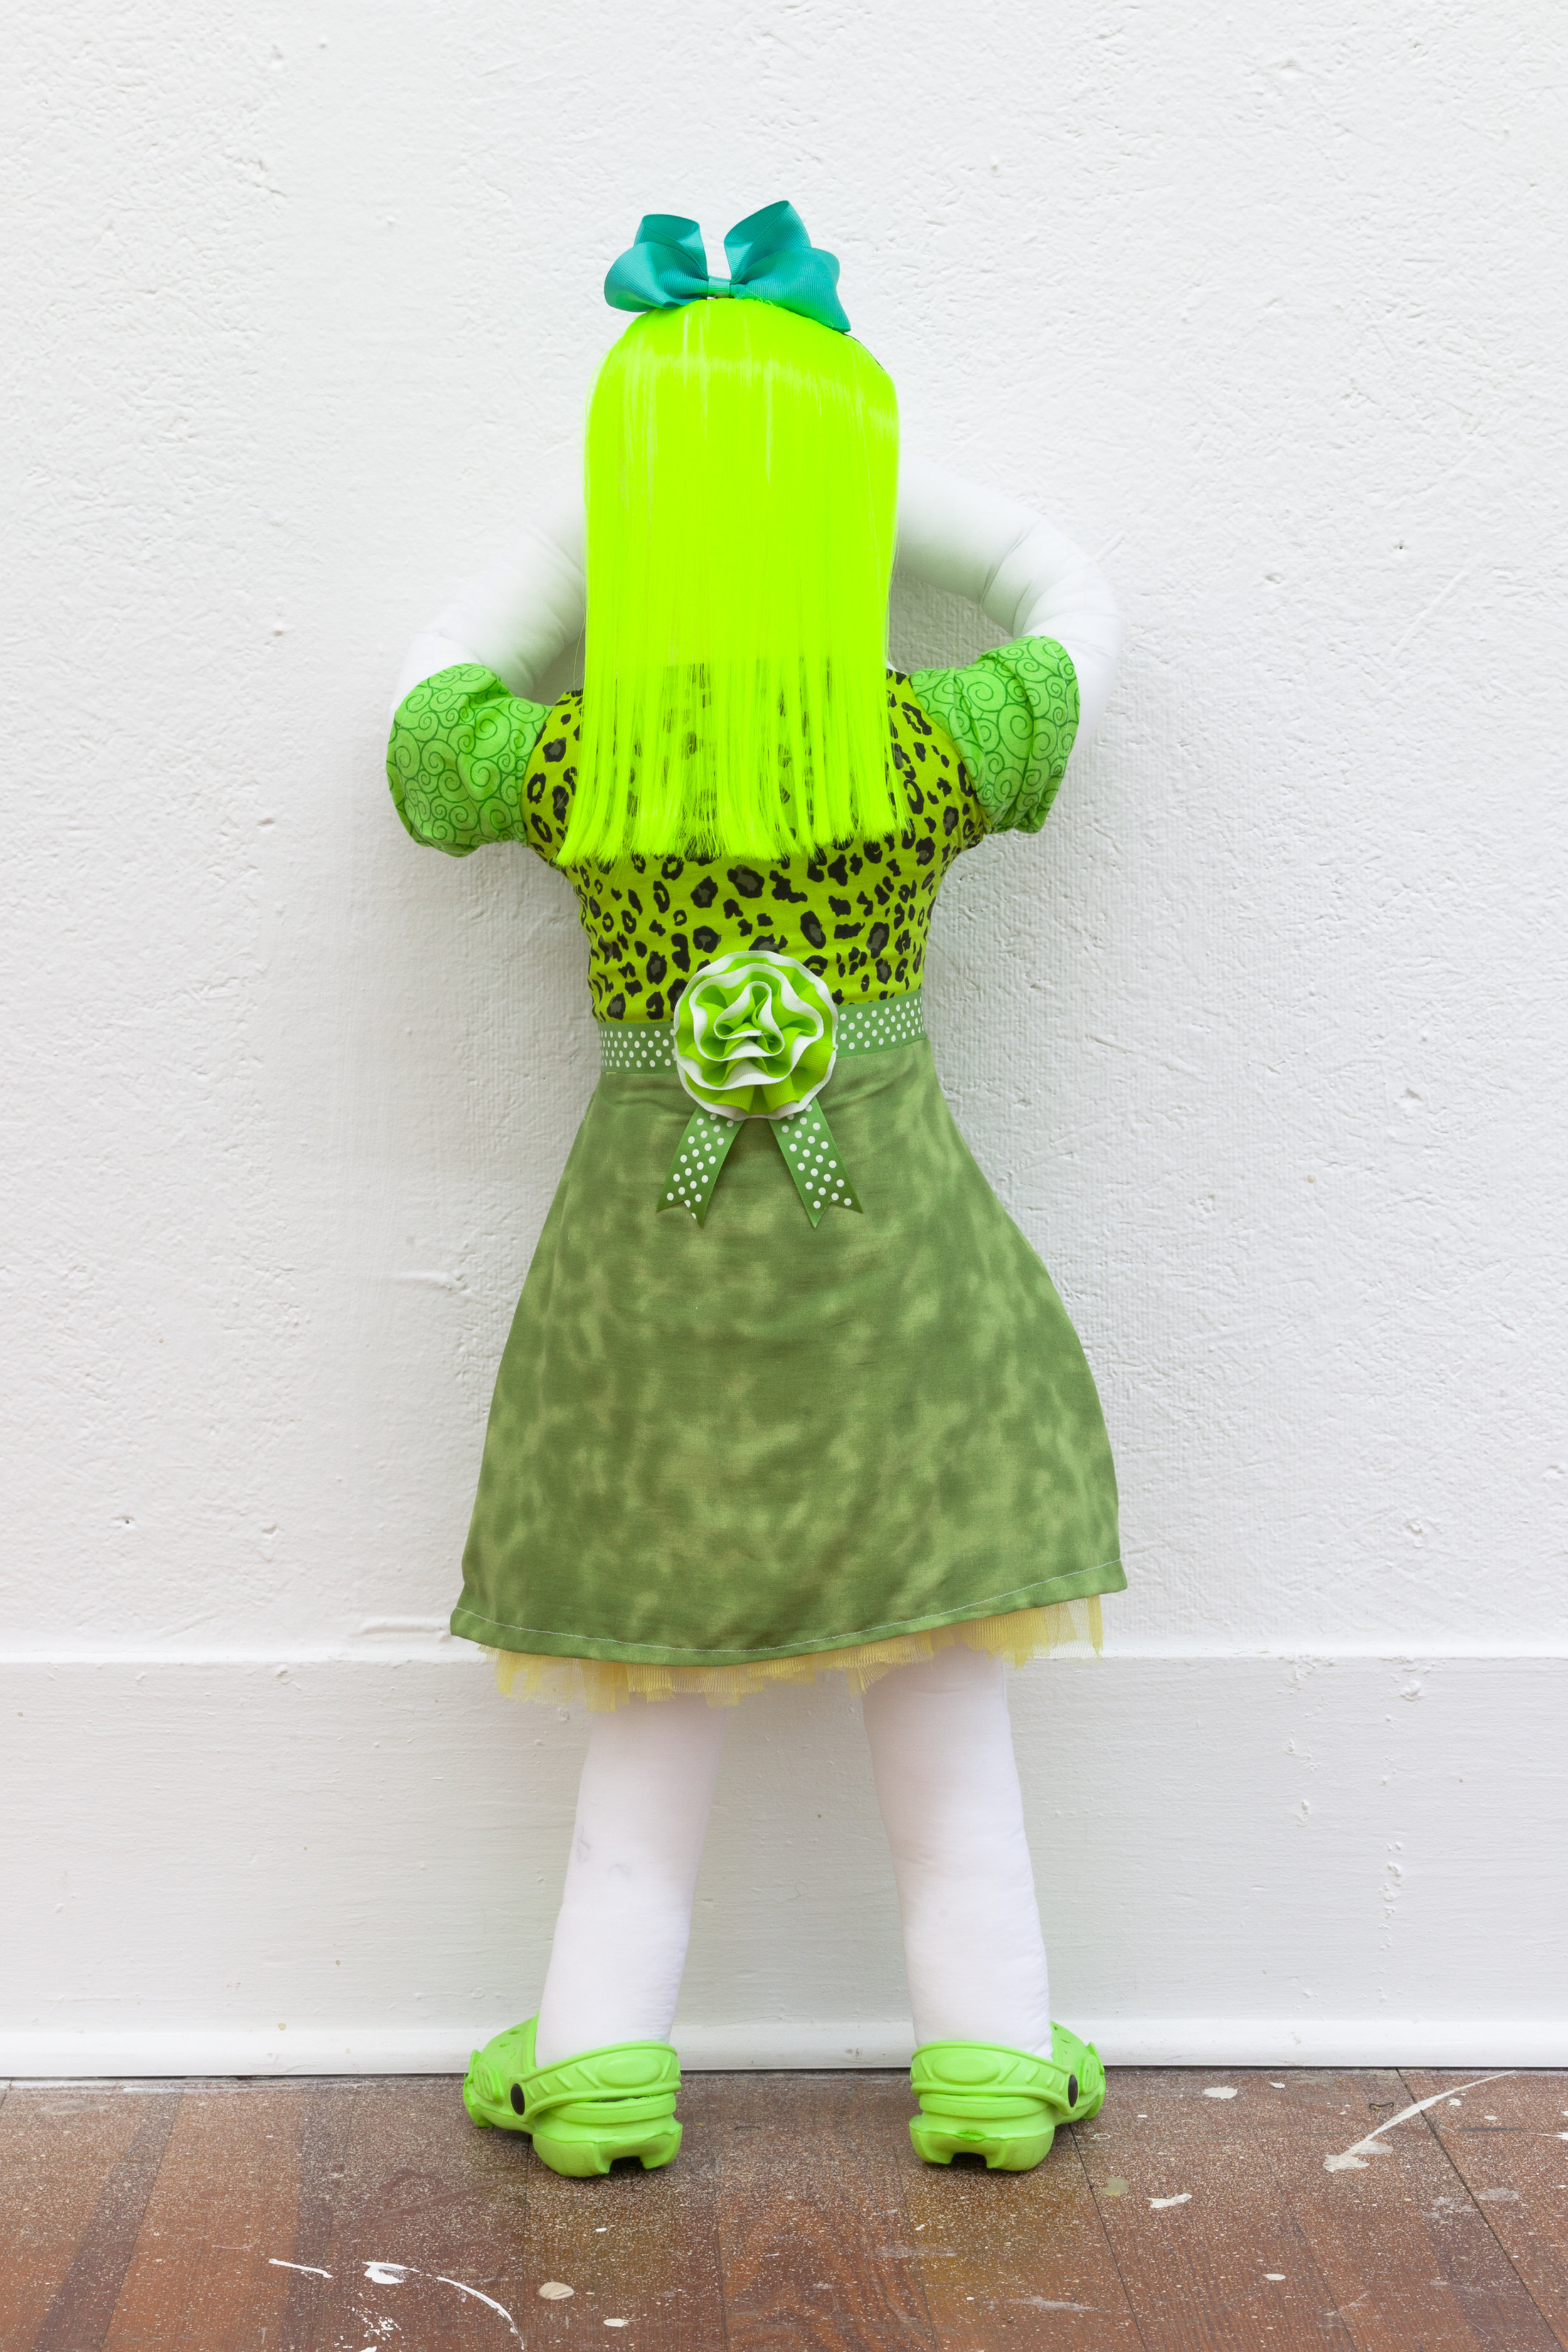  Abby Lloyd, Ruth, 2019, Fabric, Poly-Fil, ribbon, hair extensions, found materials Approximately 36 x 14 inches 